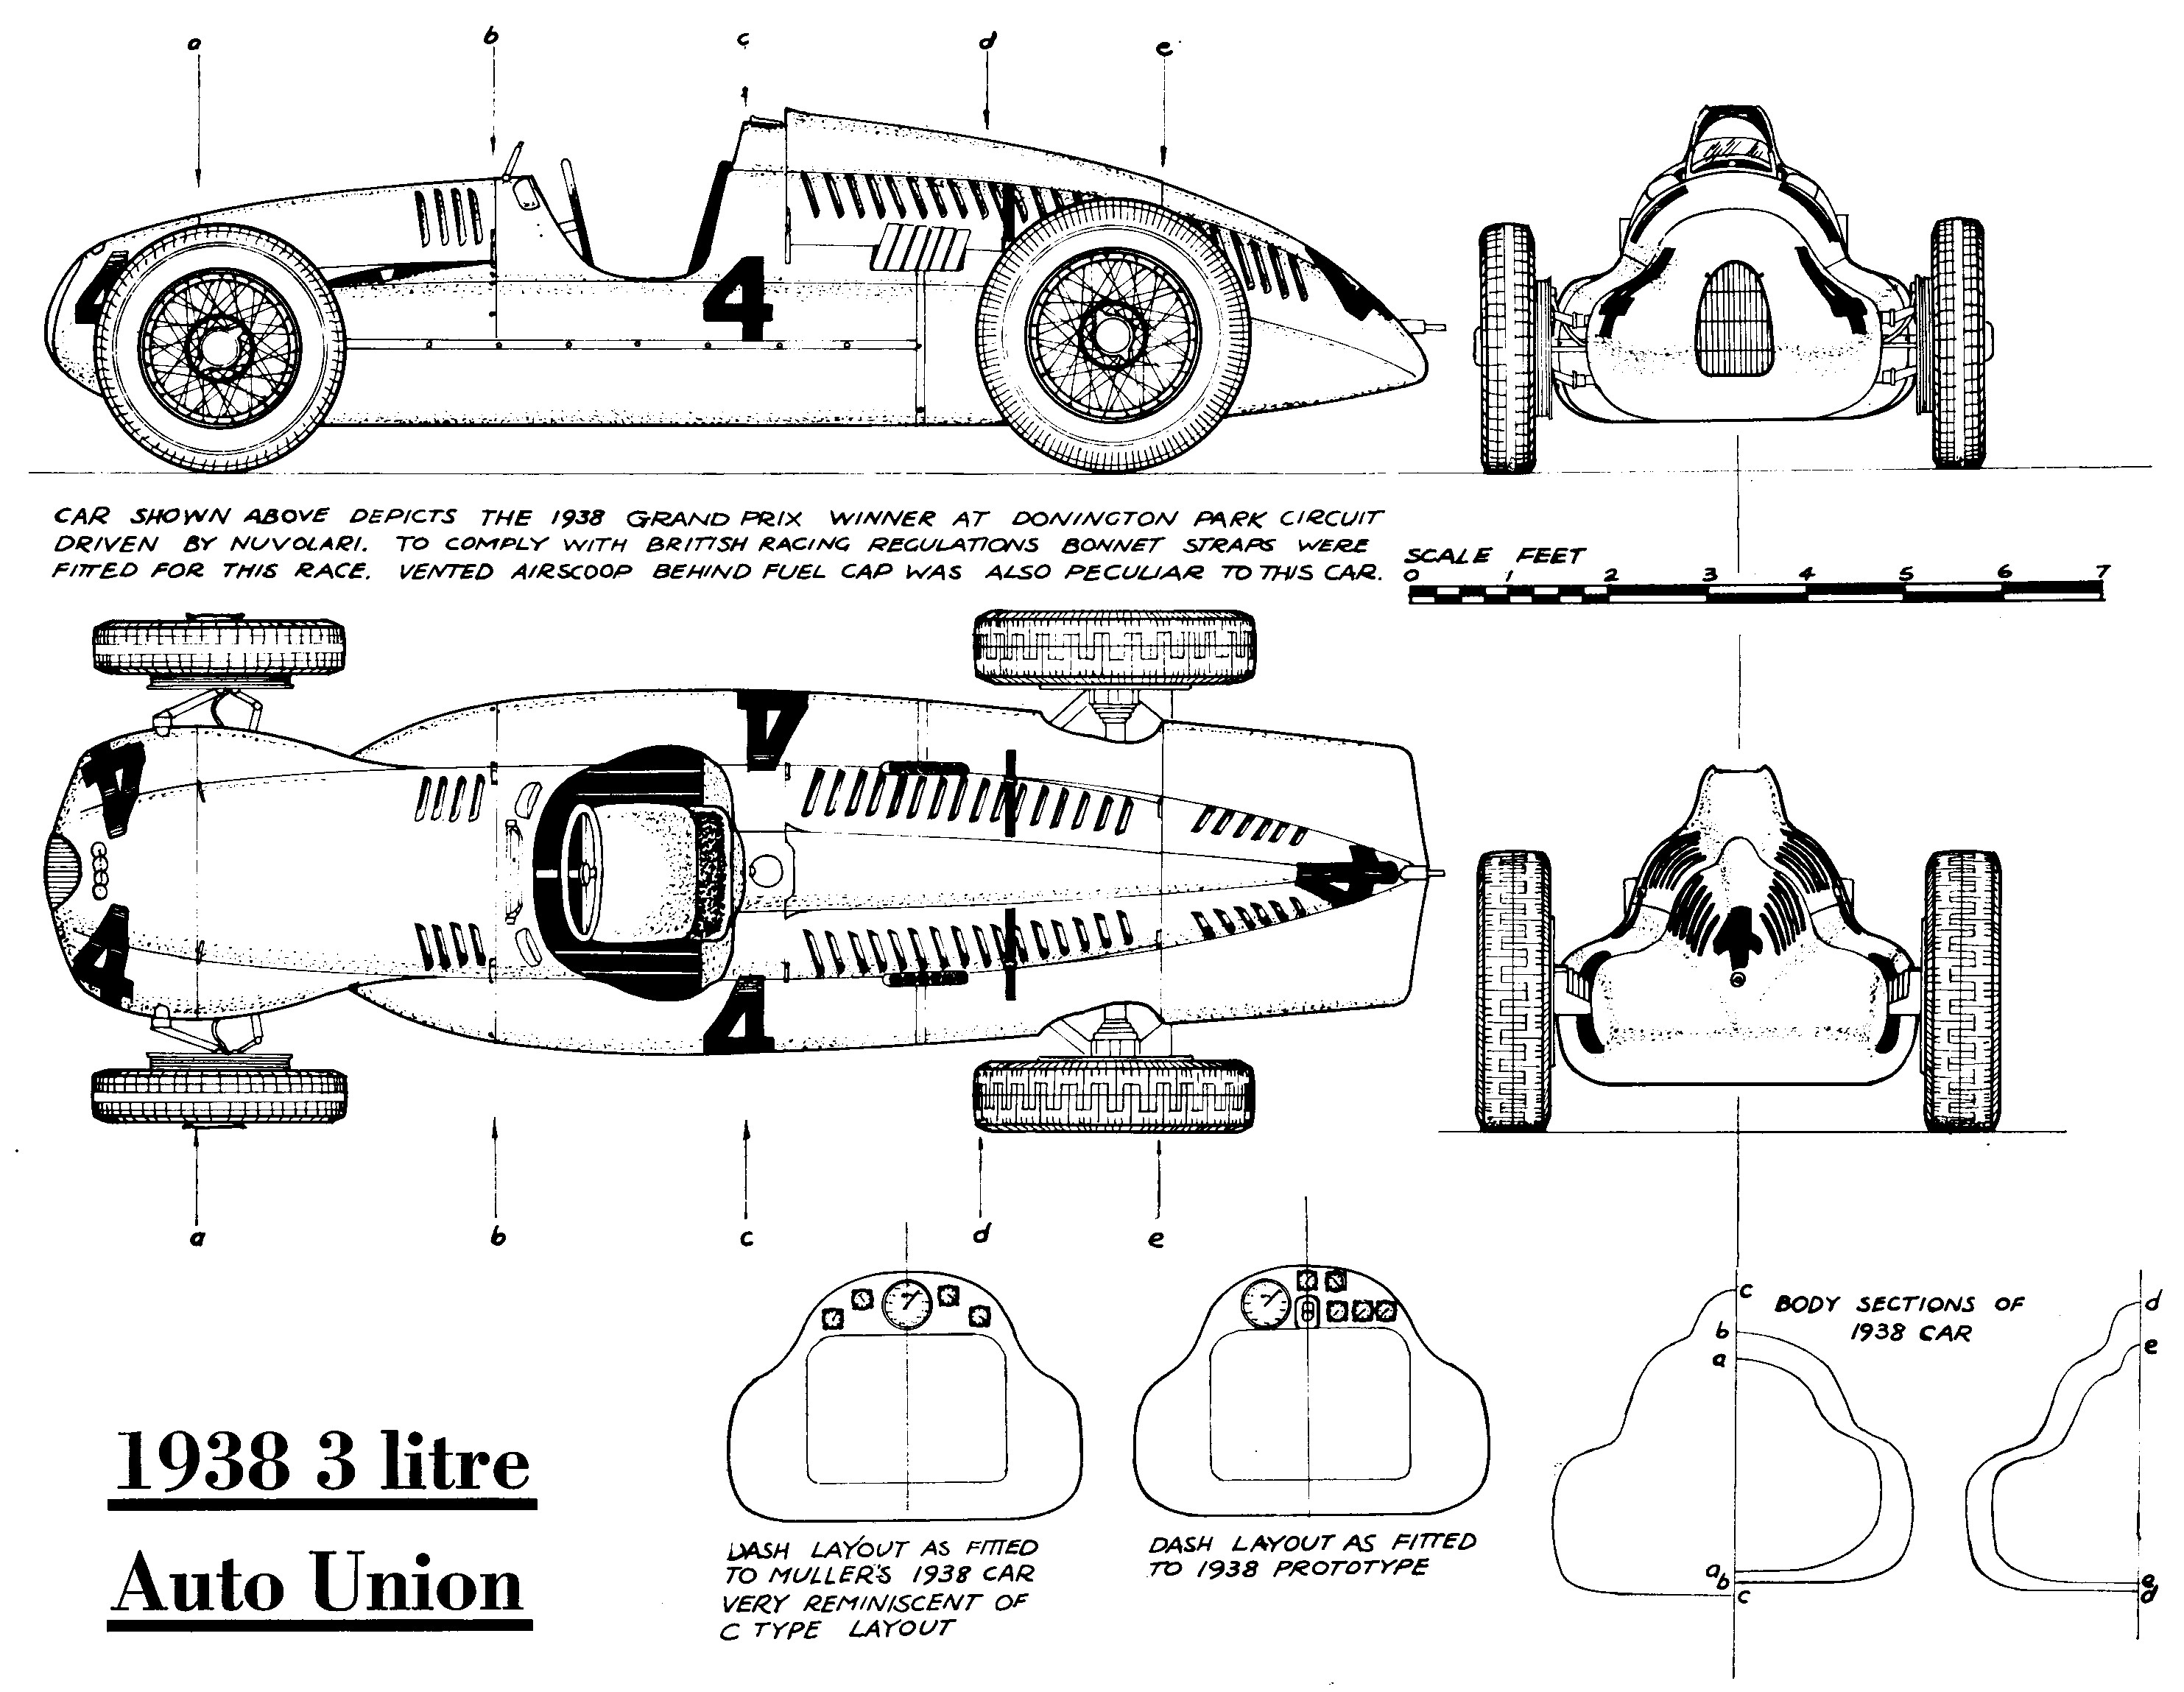 Diagram Of Car From Above Auto Union Silver Arrows and Silver Fish Pinterest Of Diagram Of Car From Above